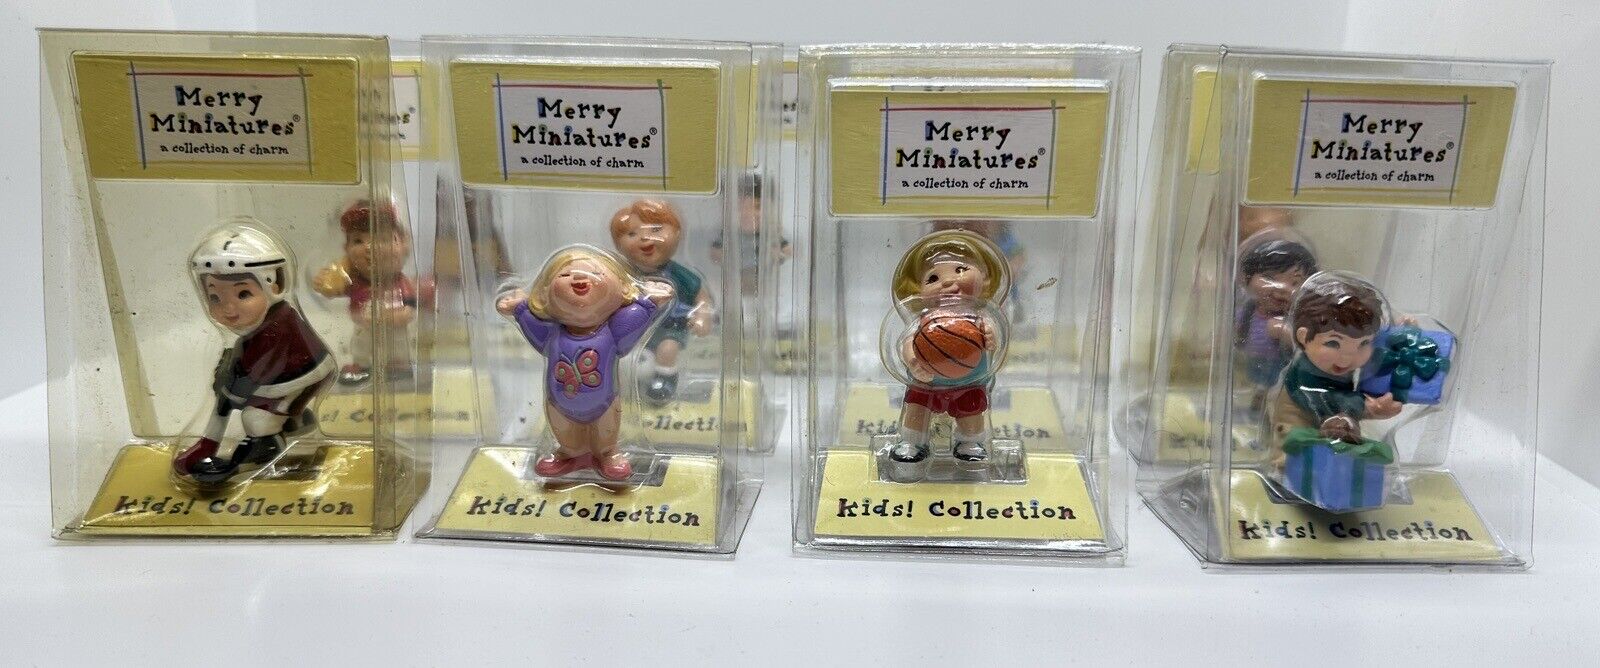 2002 Hallmark Merry Miniatures Kids Collection  SET OF 12 Charms in Orig Package